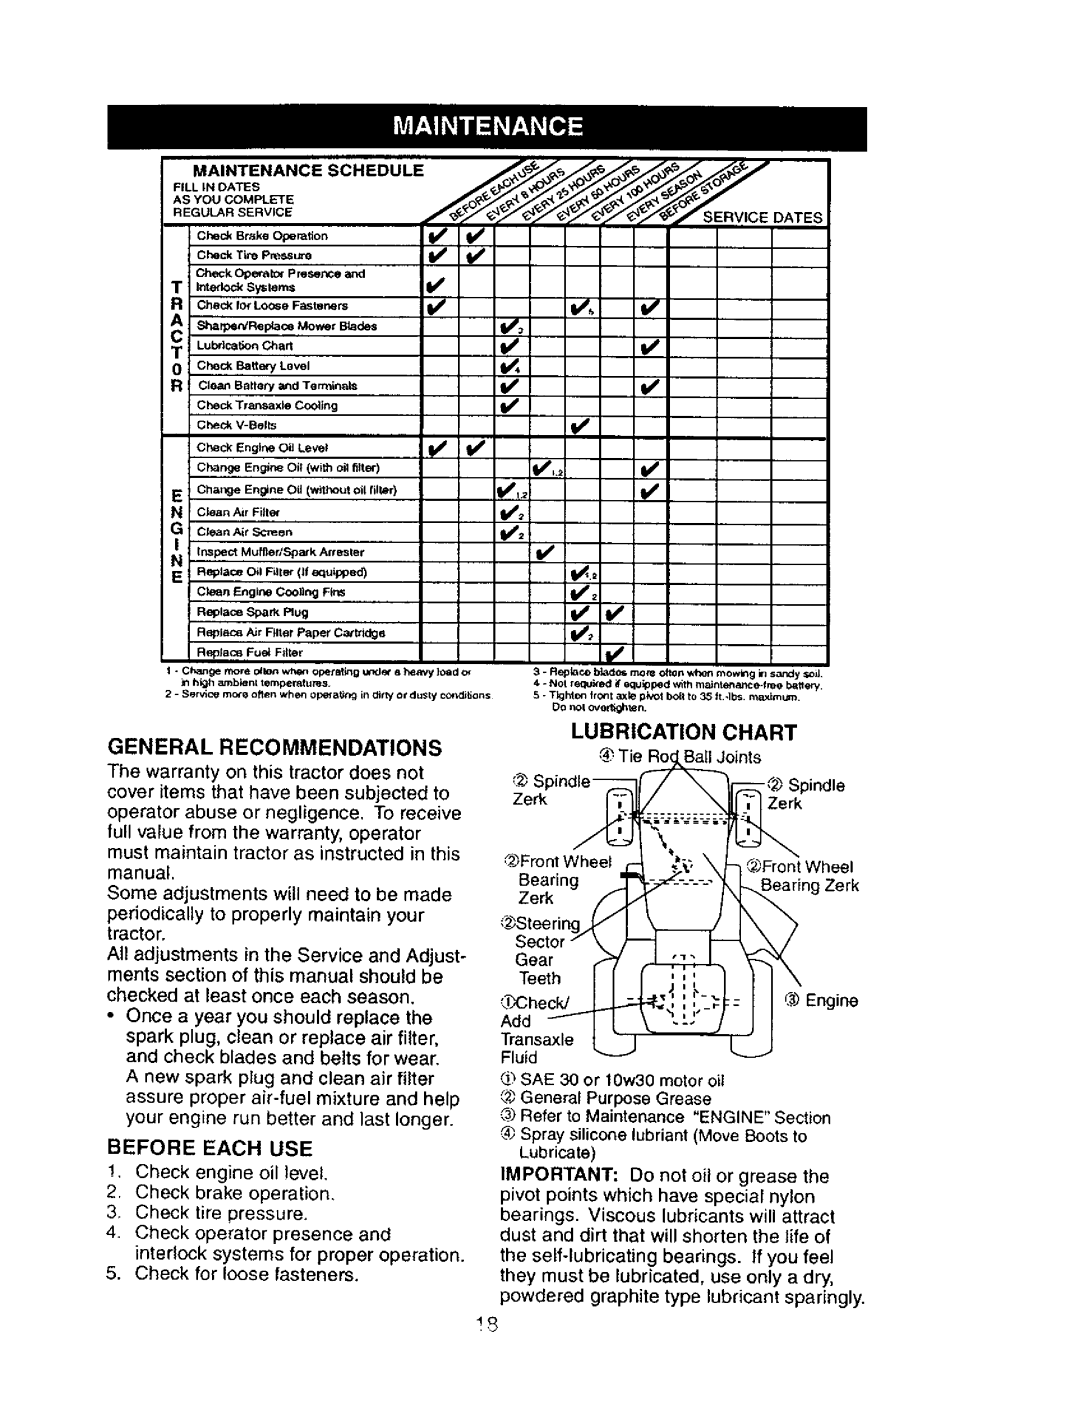 Craftsman 917.27603 manual I.tef Systems, Checld 